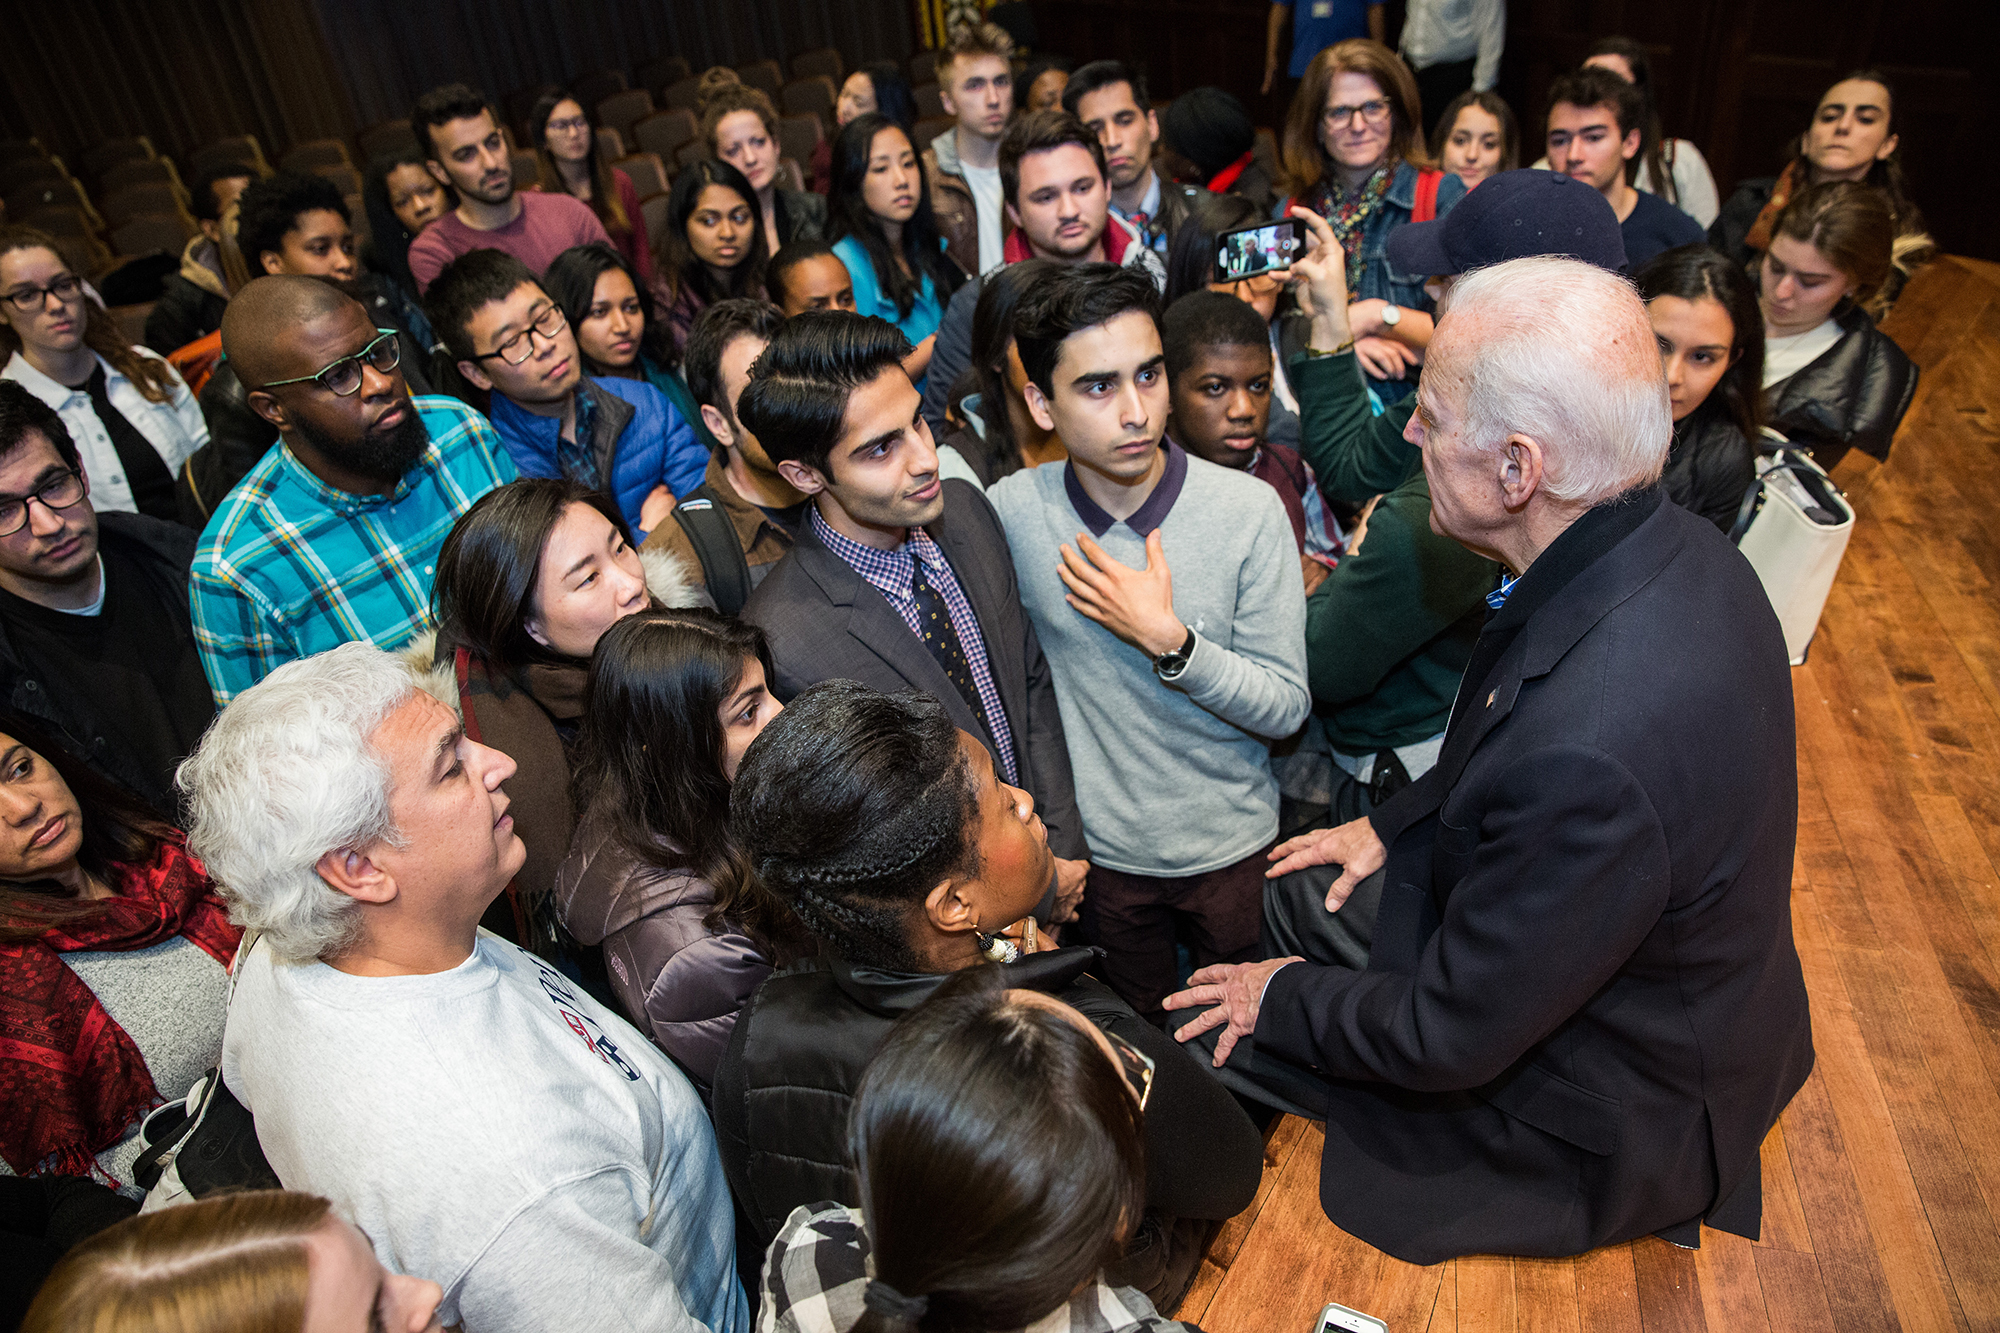 Biden on stage with students